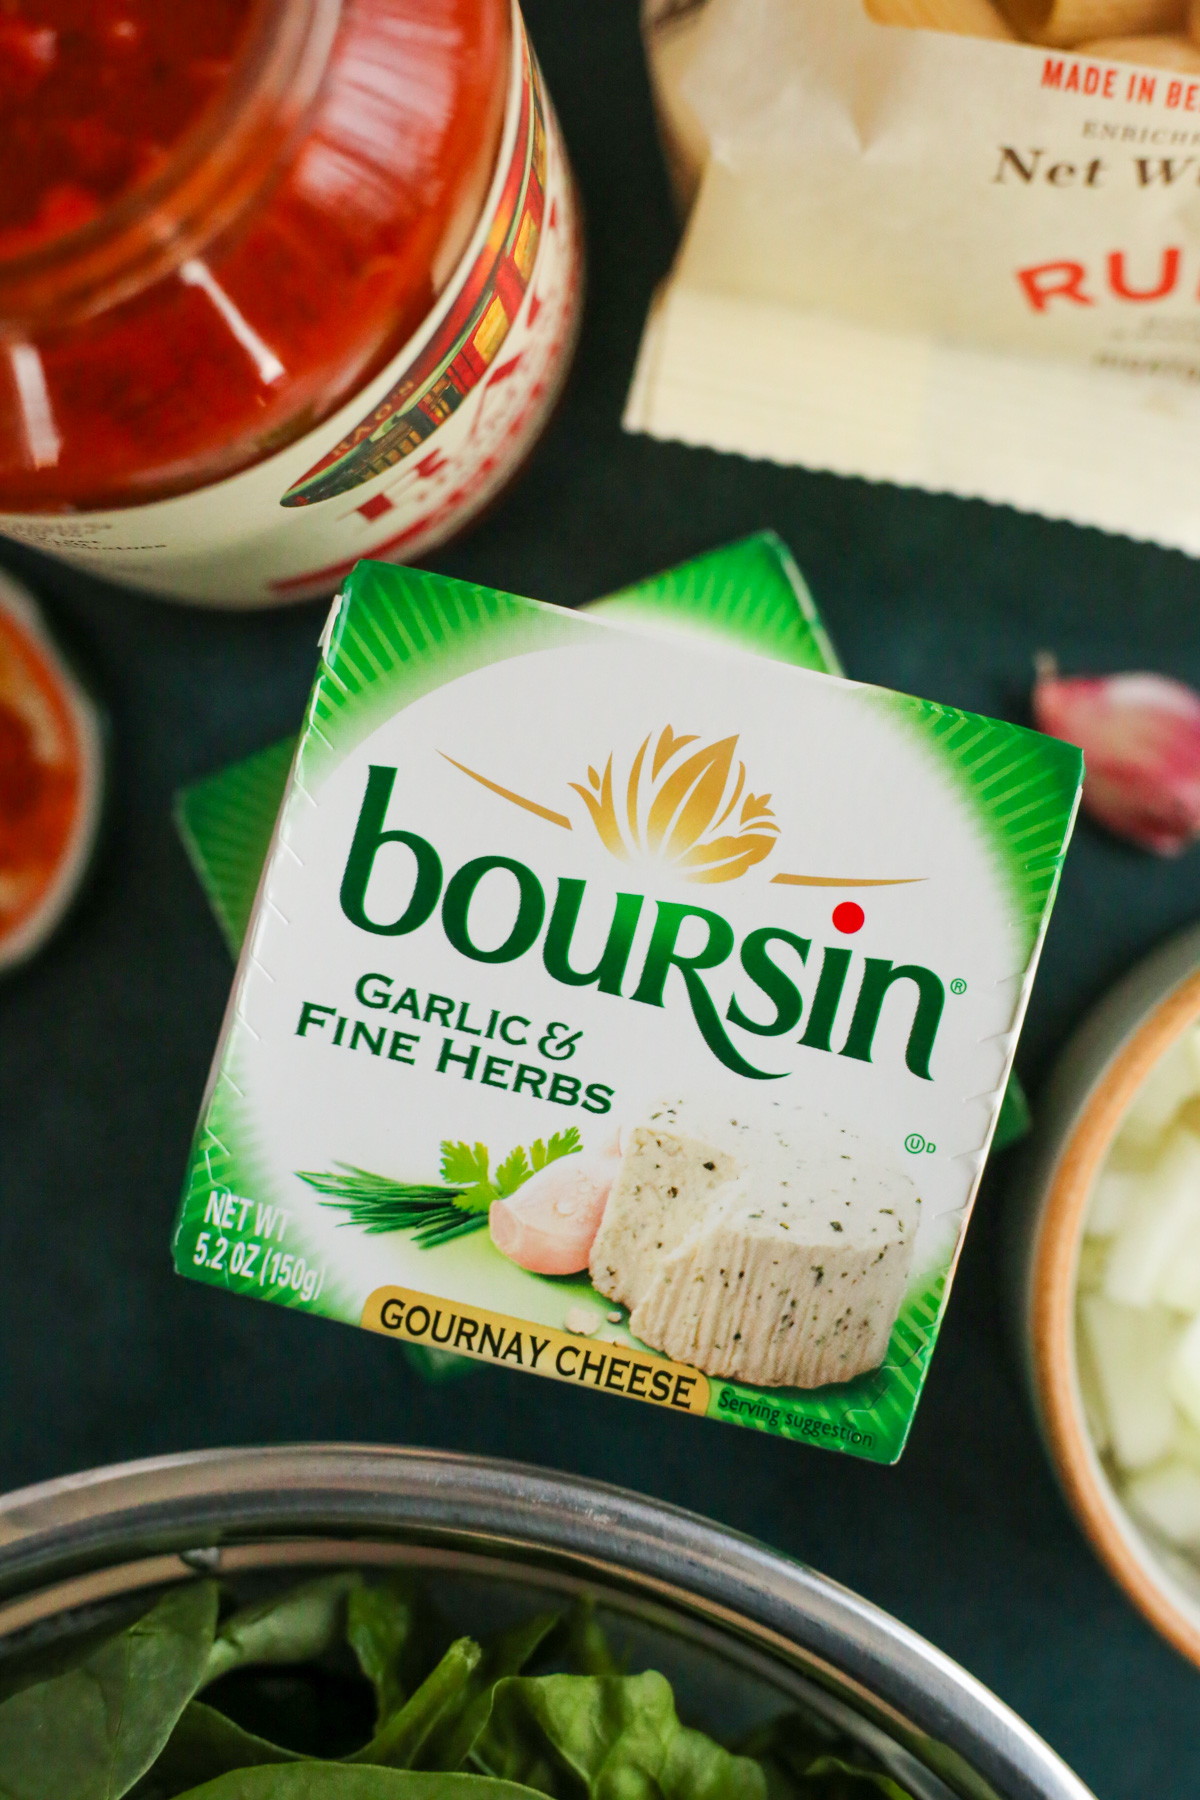 A closer view of the packaging for Boursin cheese in the Garlic and Fine Herbs flavor, stacked on top of another package and displayed alongside other ingredients on a dark teal green backdrop